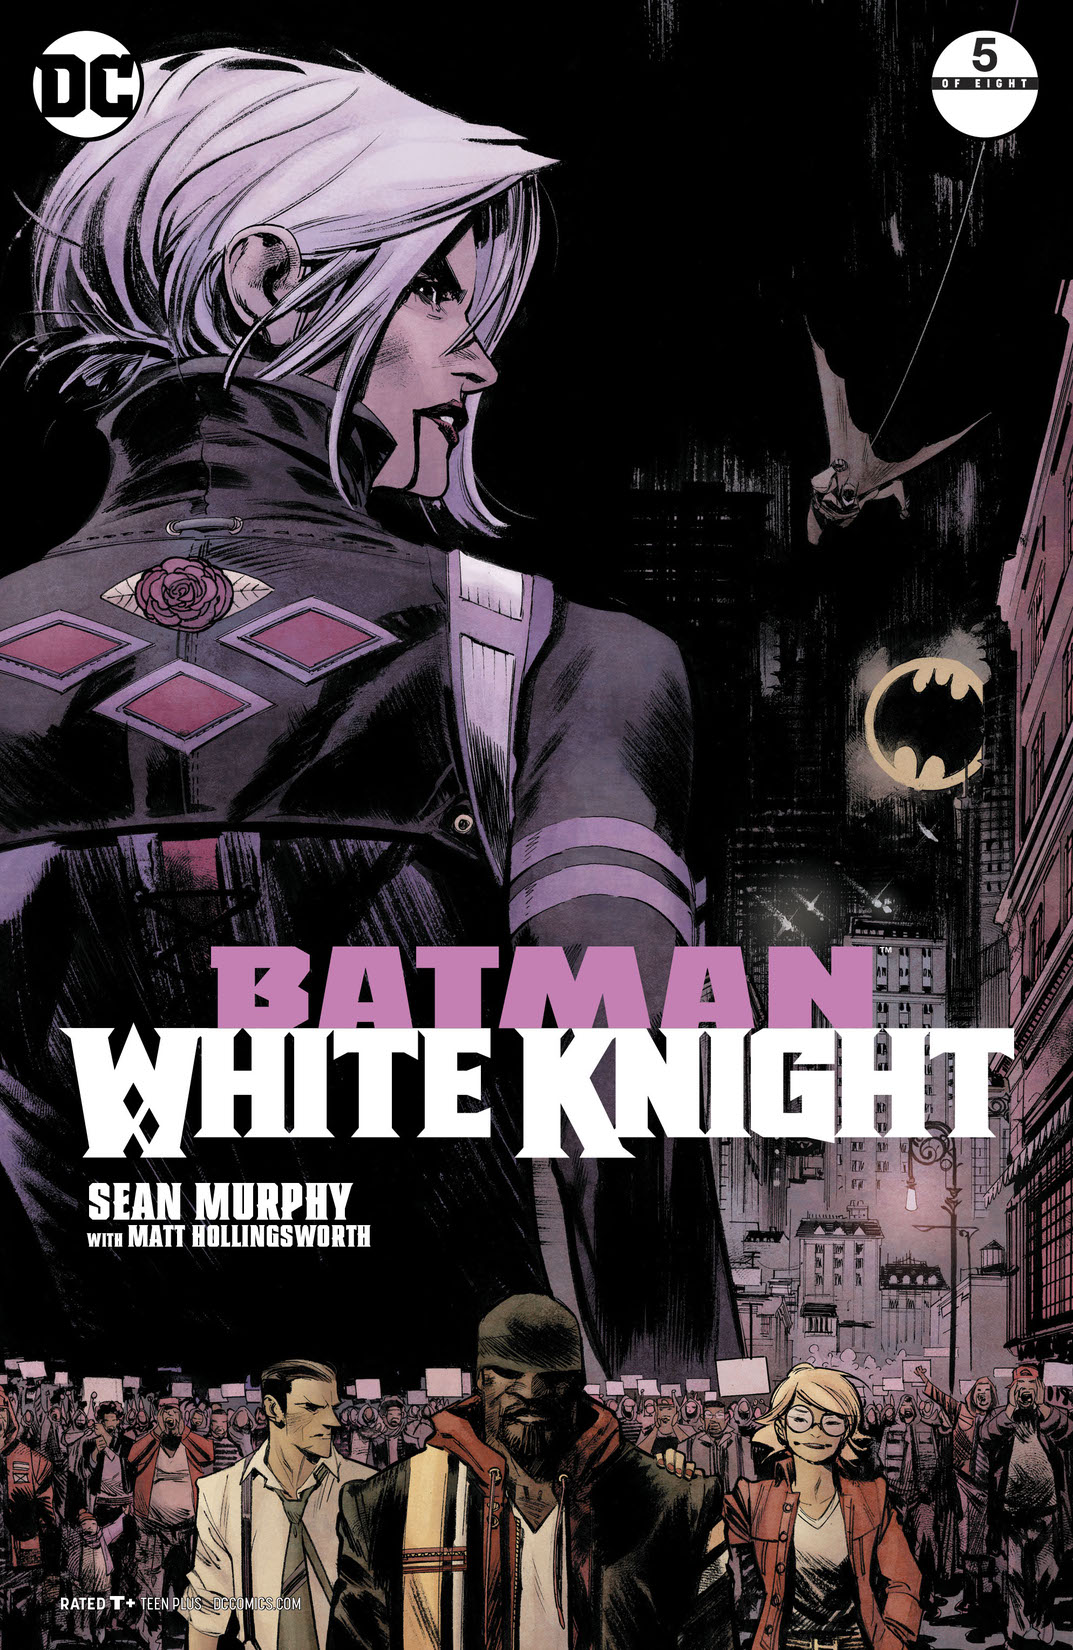 Batman: White Knight #5 preview images